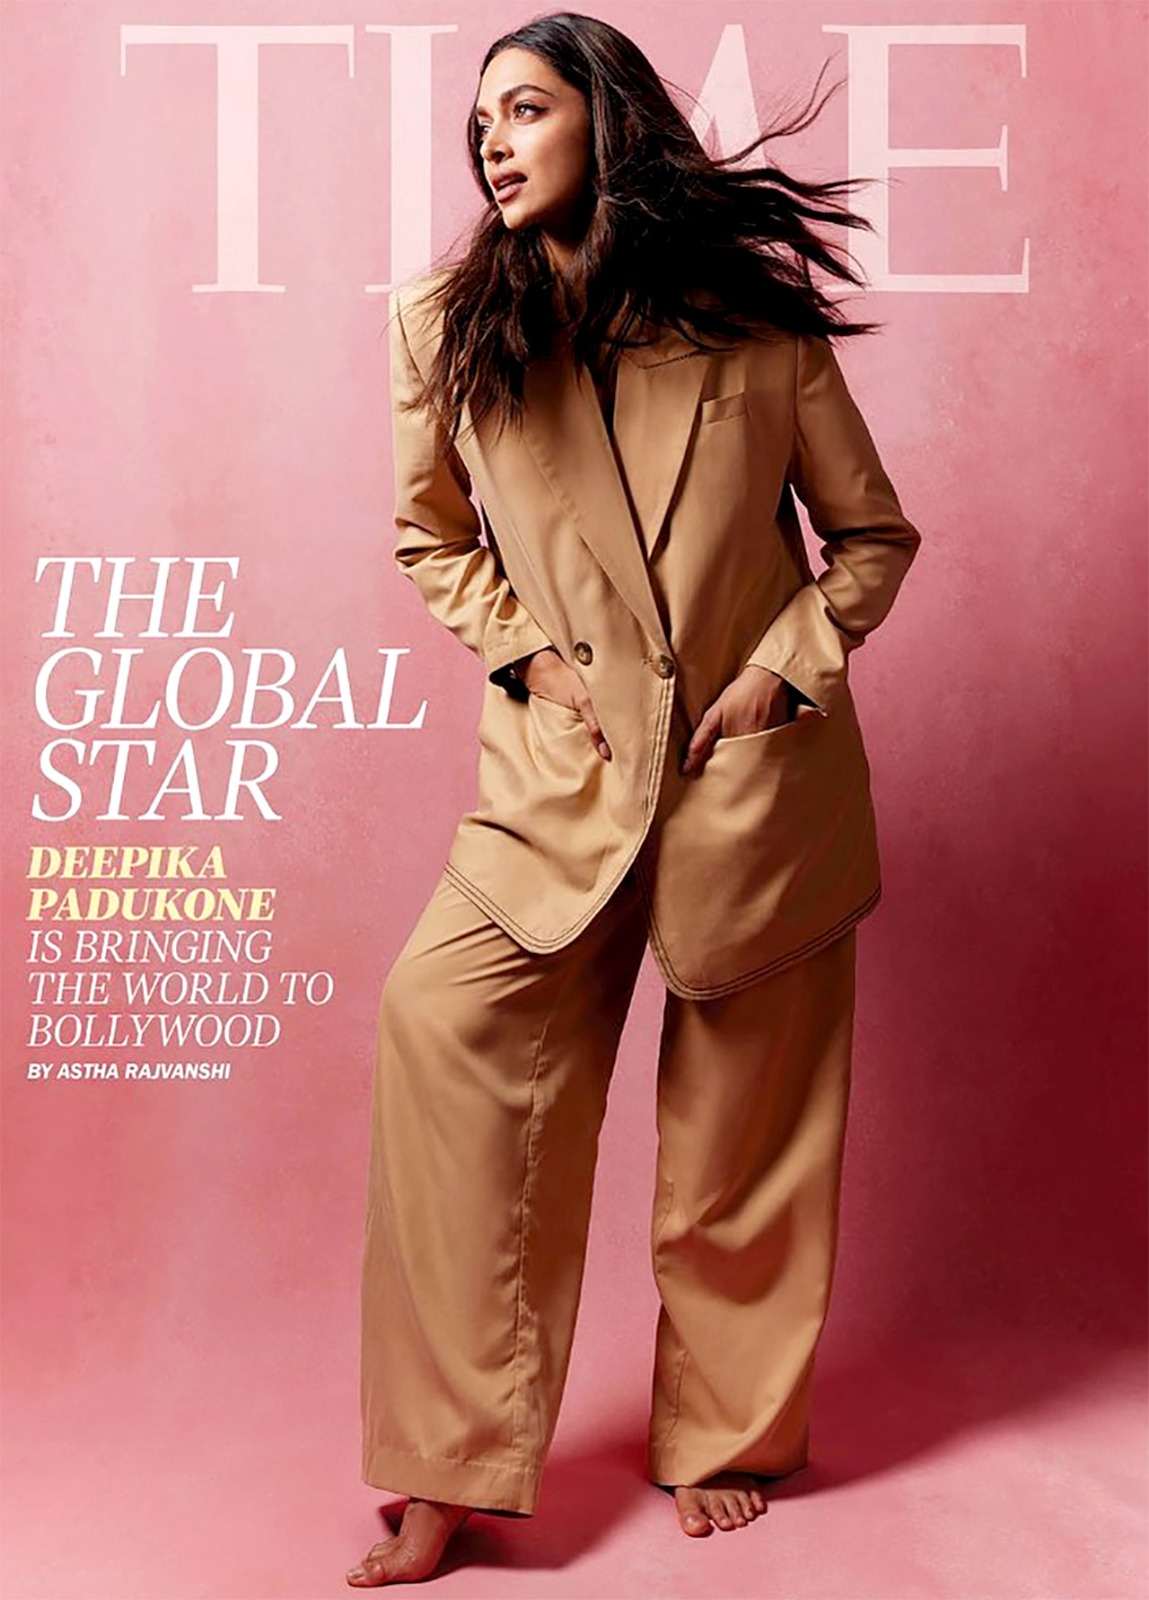 Deepika Padukone turns boss-lady for the cover of TIME Magazine; joins the likes of Barrack Obama, Oprah Winfrey : Bollywood News